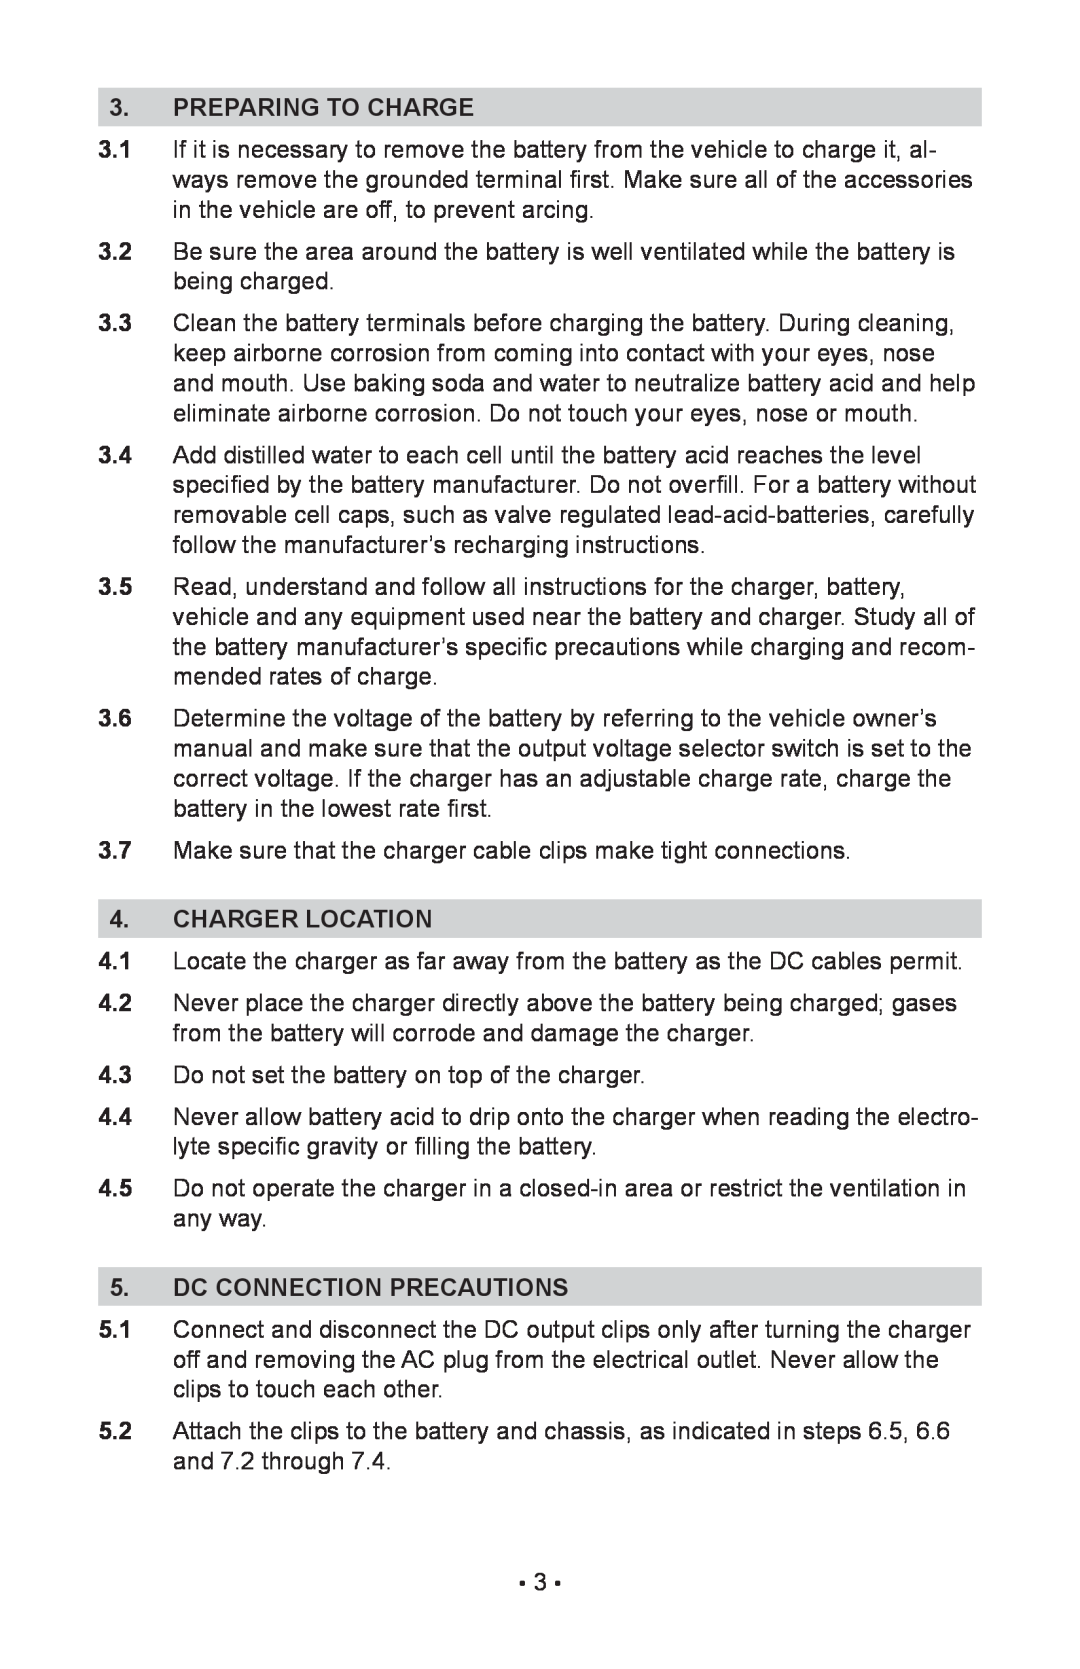 Schumacher MSC-2405 owner manual Preparing To Charge, Charger Location, Dc Connection Precautions 